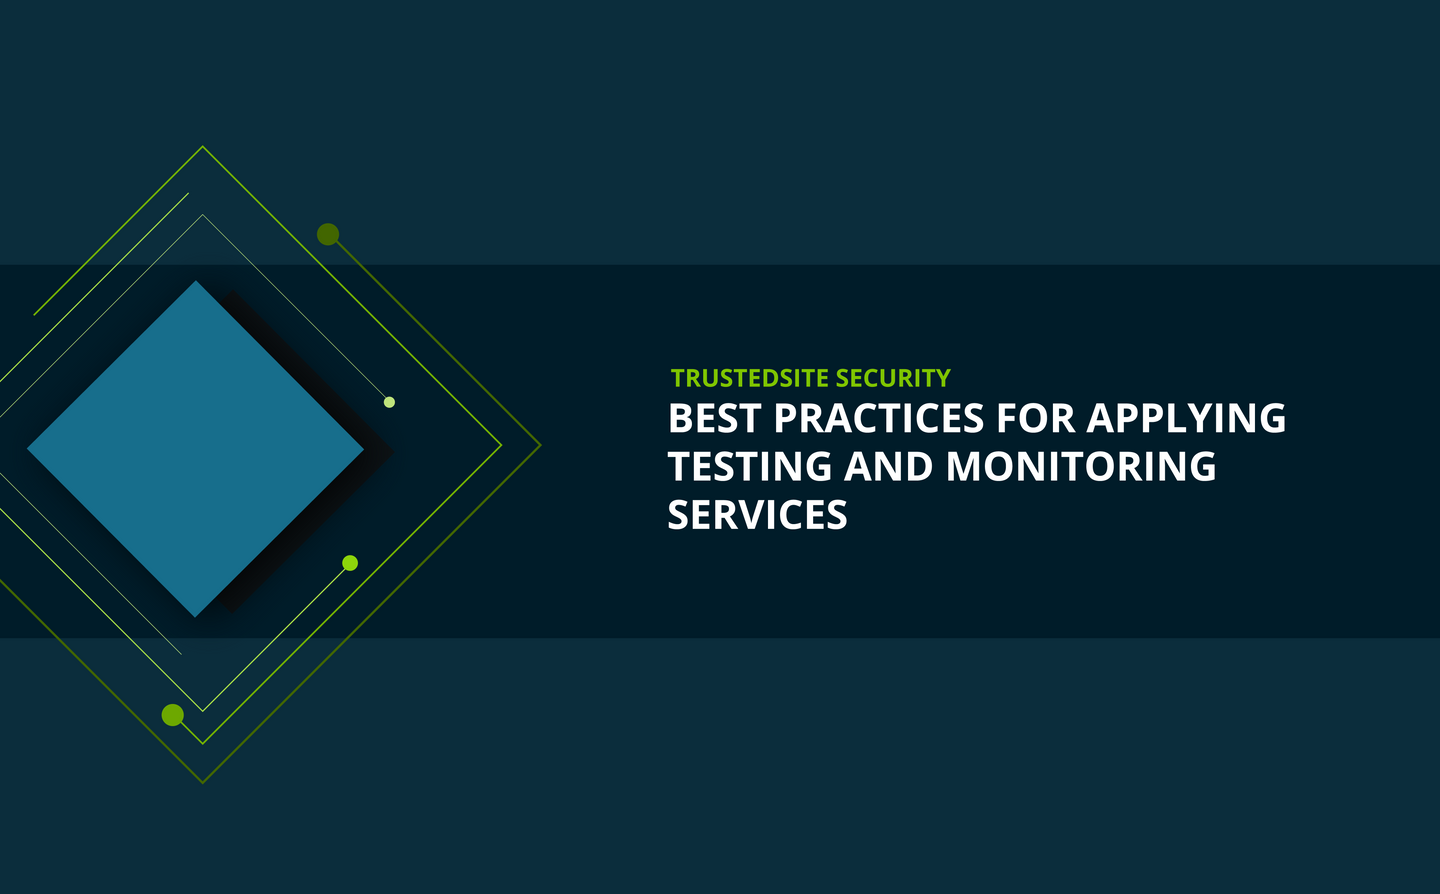 Best practices for applying TrustedSite's security testing and monitoring services to your assets